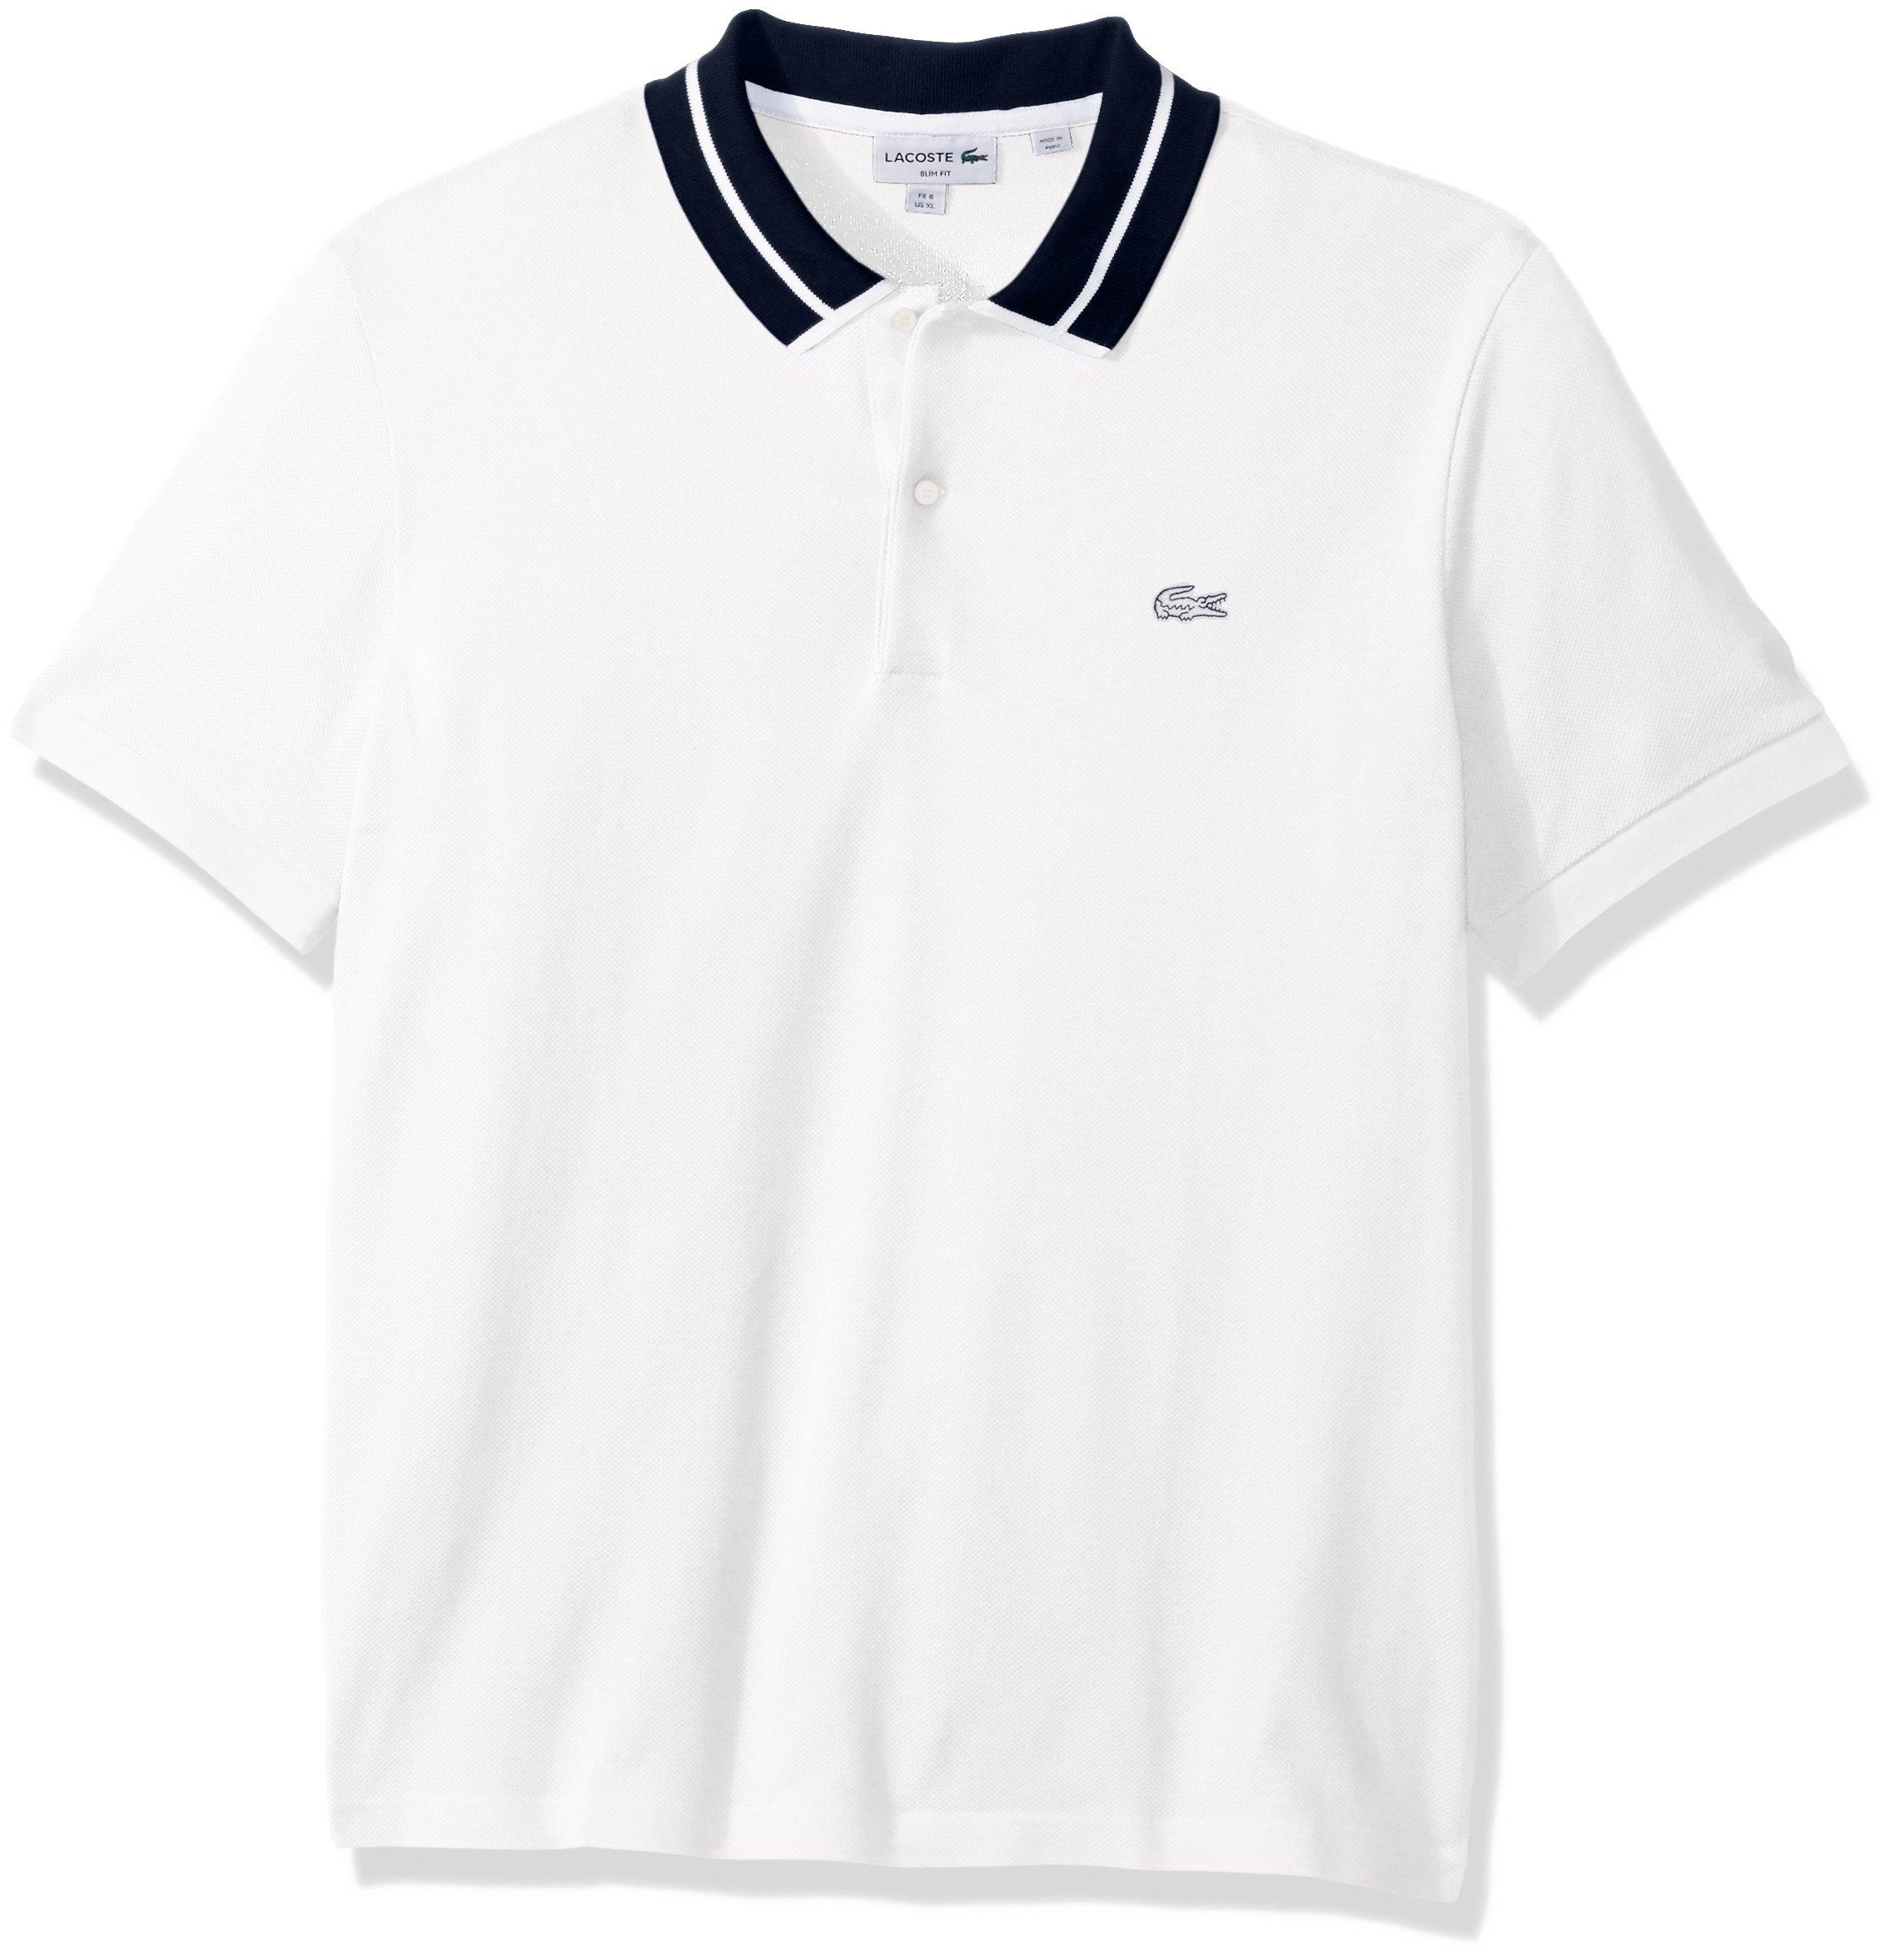 Lacoste Mens Short Sleeve 3 Plys Heavy Pique Polo with White Outline Croc 